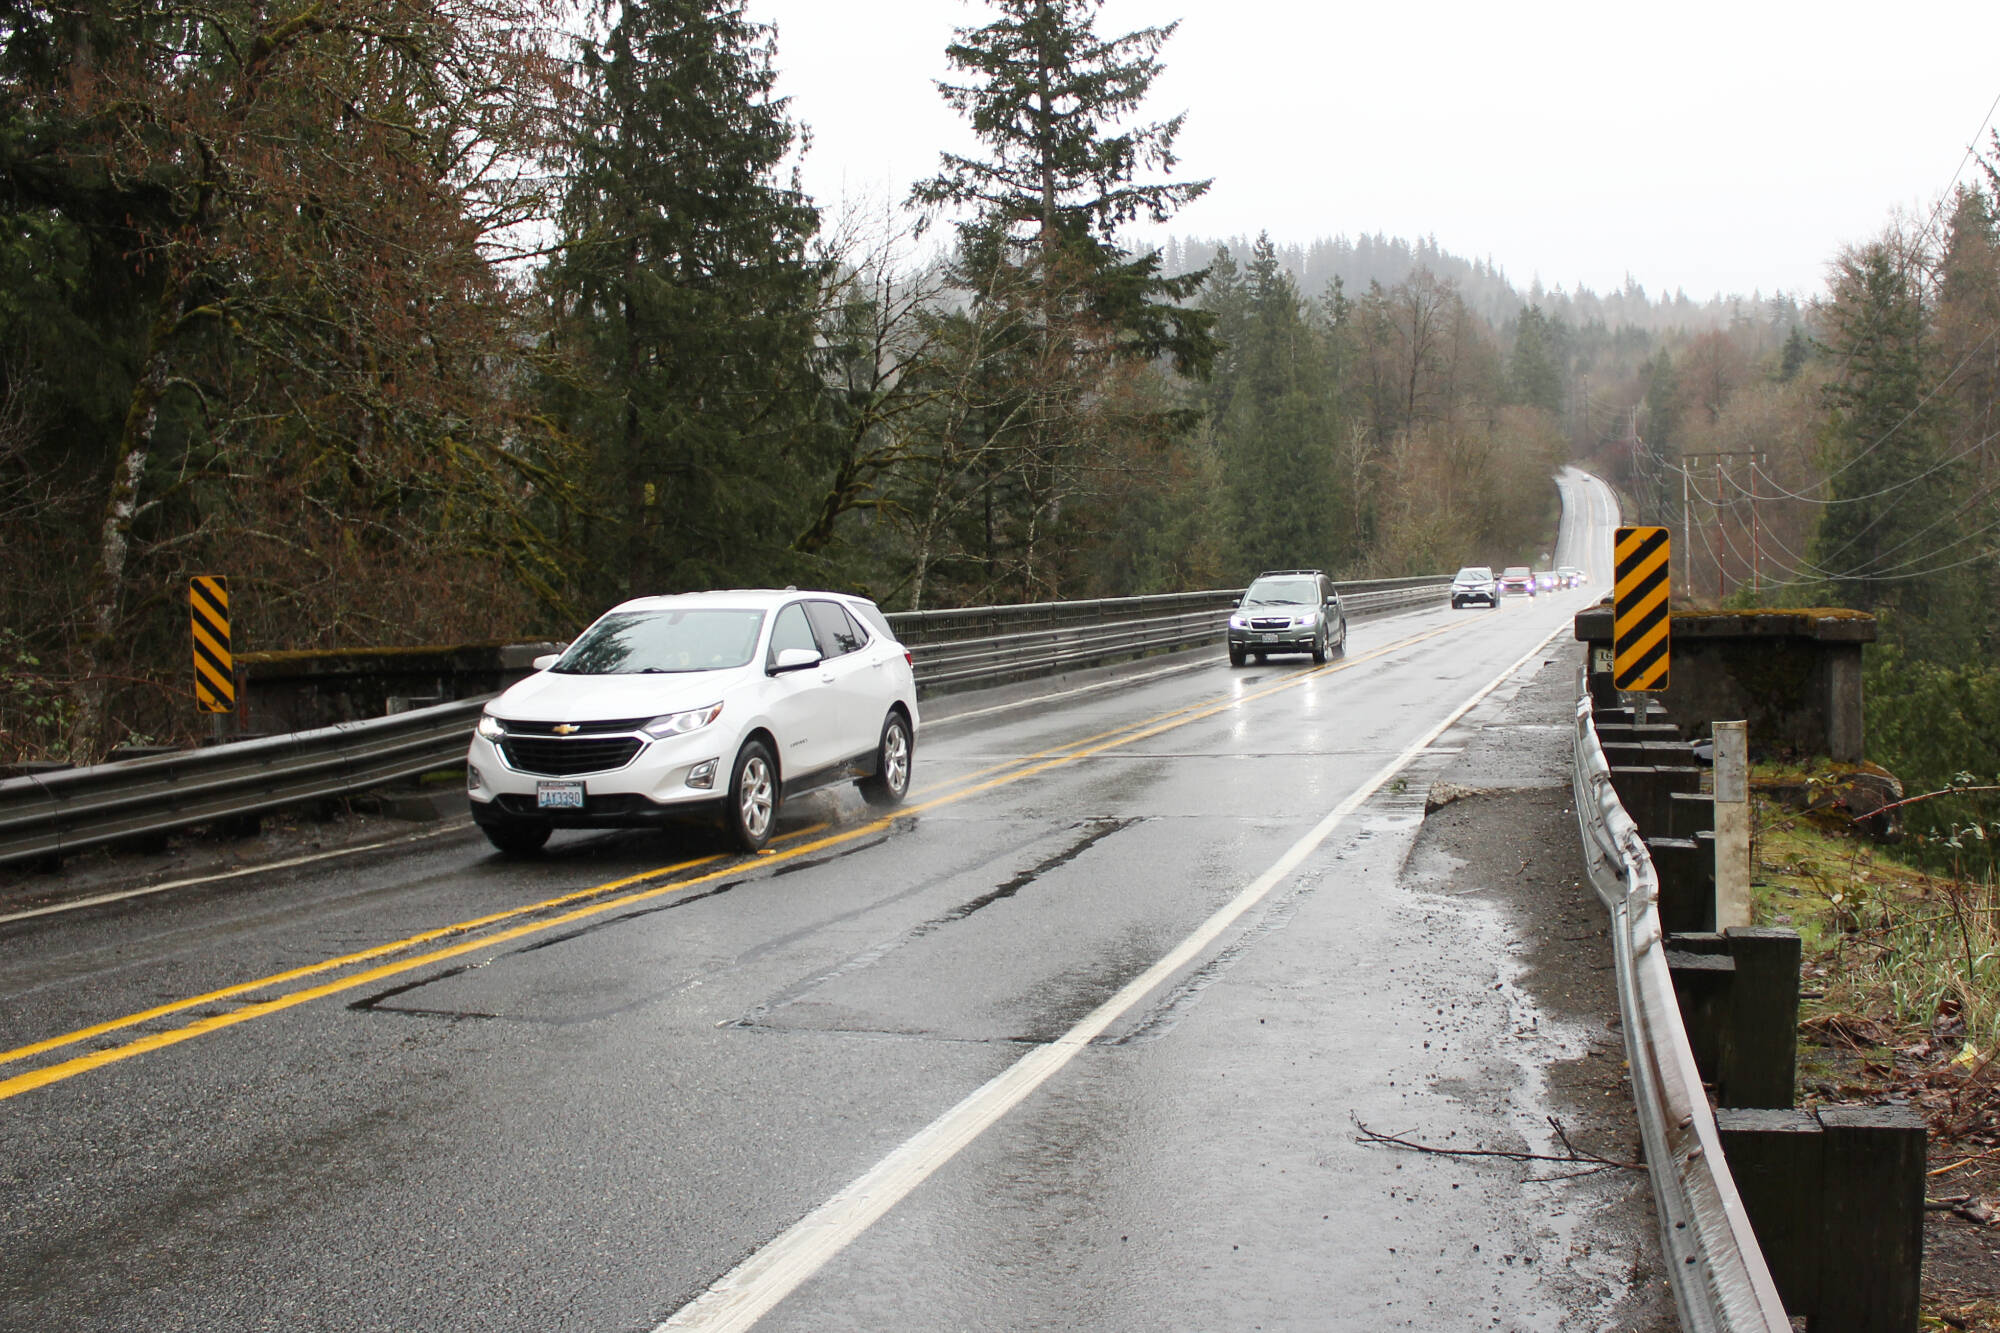 The bridge between Enumclaw and Black Diamond, known locally as the Kummer Bridge and elsewhere as the Green River Bridge, remains closed this week. Photo by Ray Miller-Still